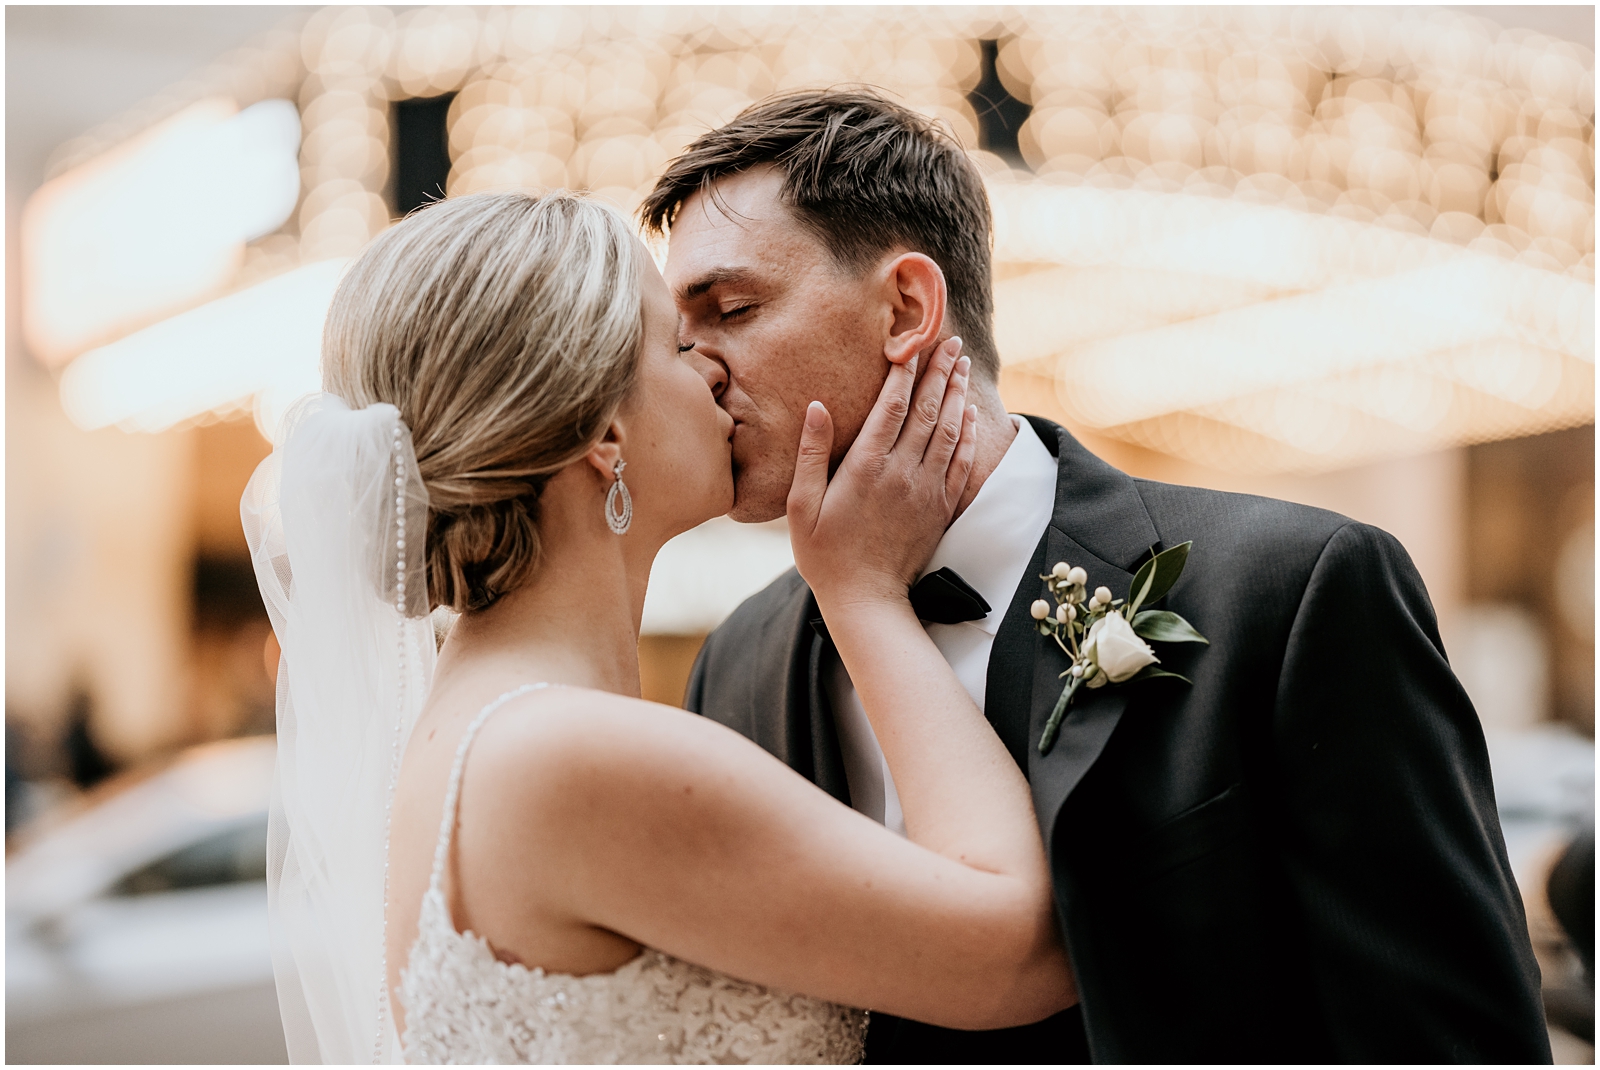 Wedding photos in downtown Cleveland